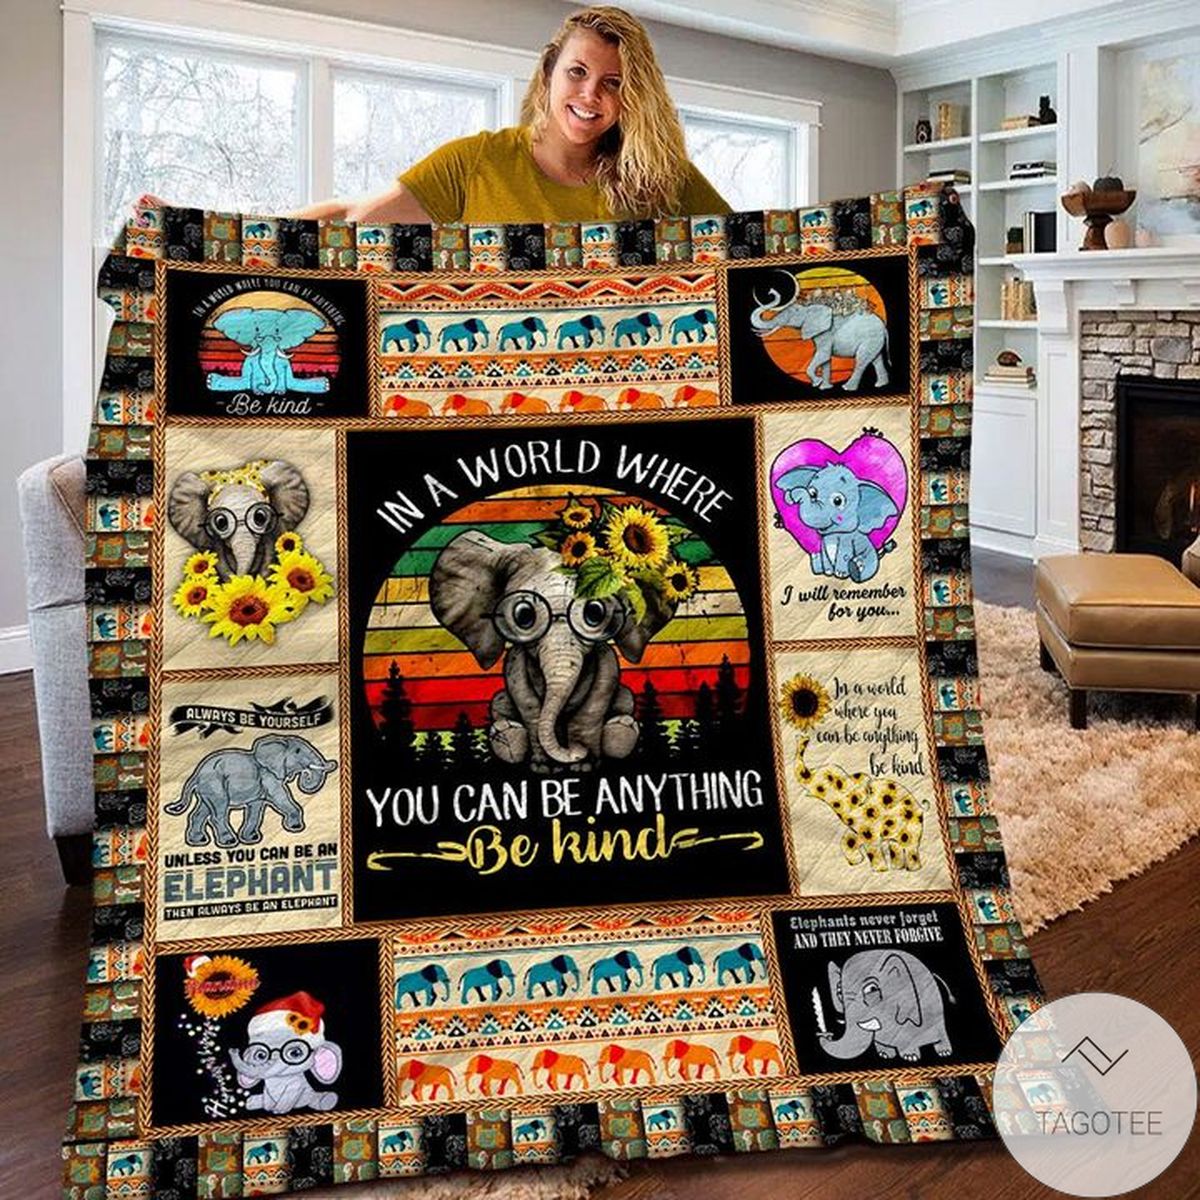 In A World Where You Can Be Anything Be Kind Elephant Quilt